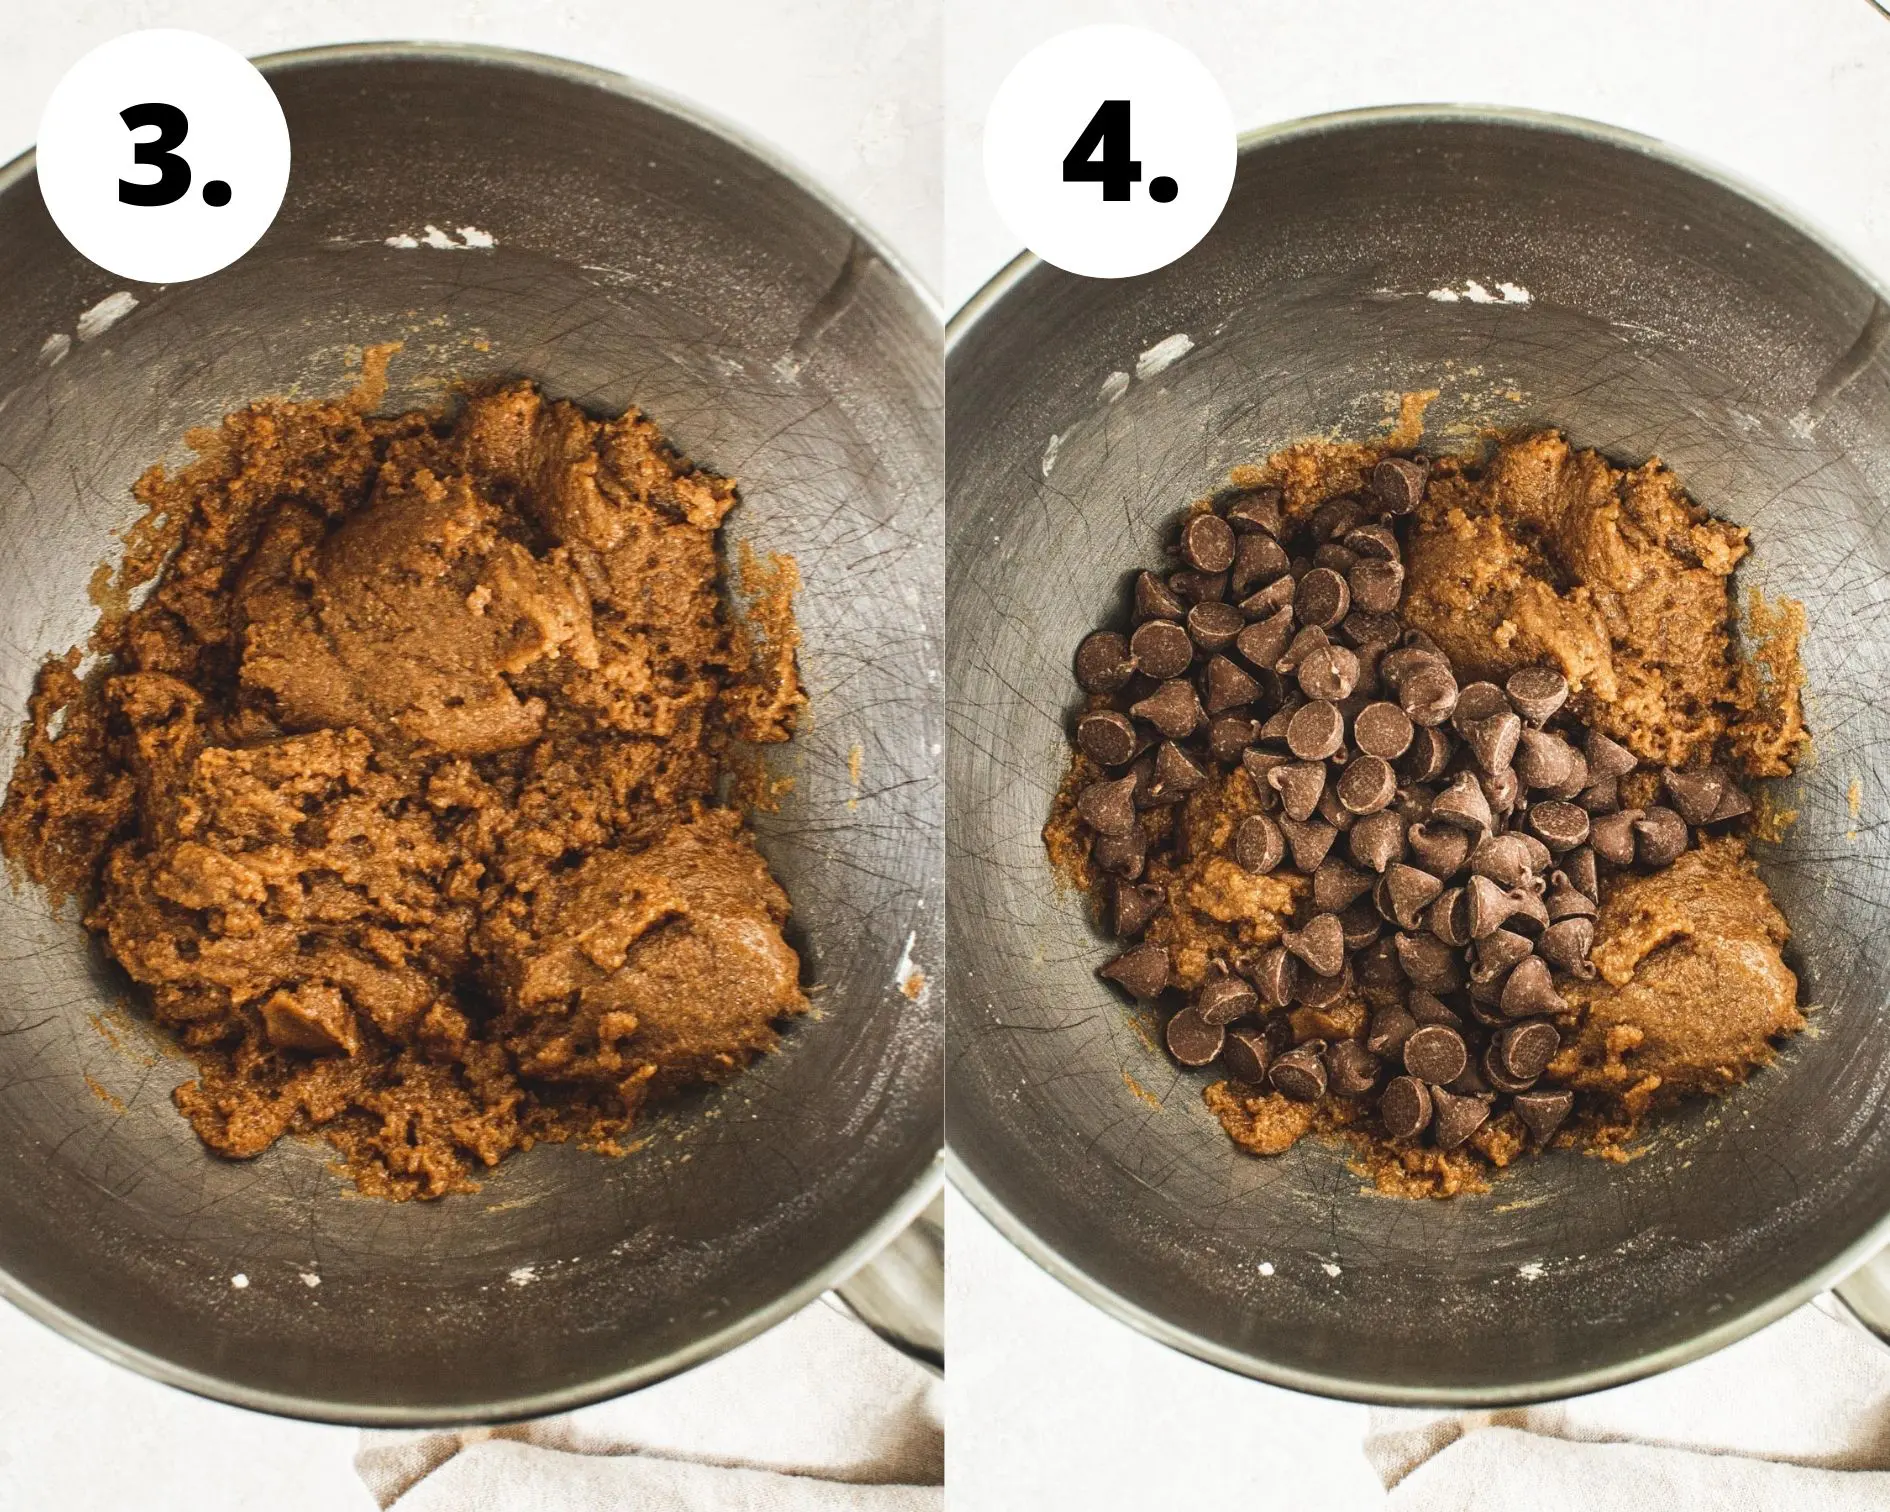 Whole wheat chocolate chip cookies process steps 3 and 4.